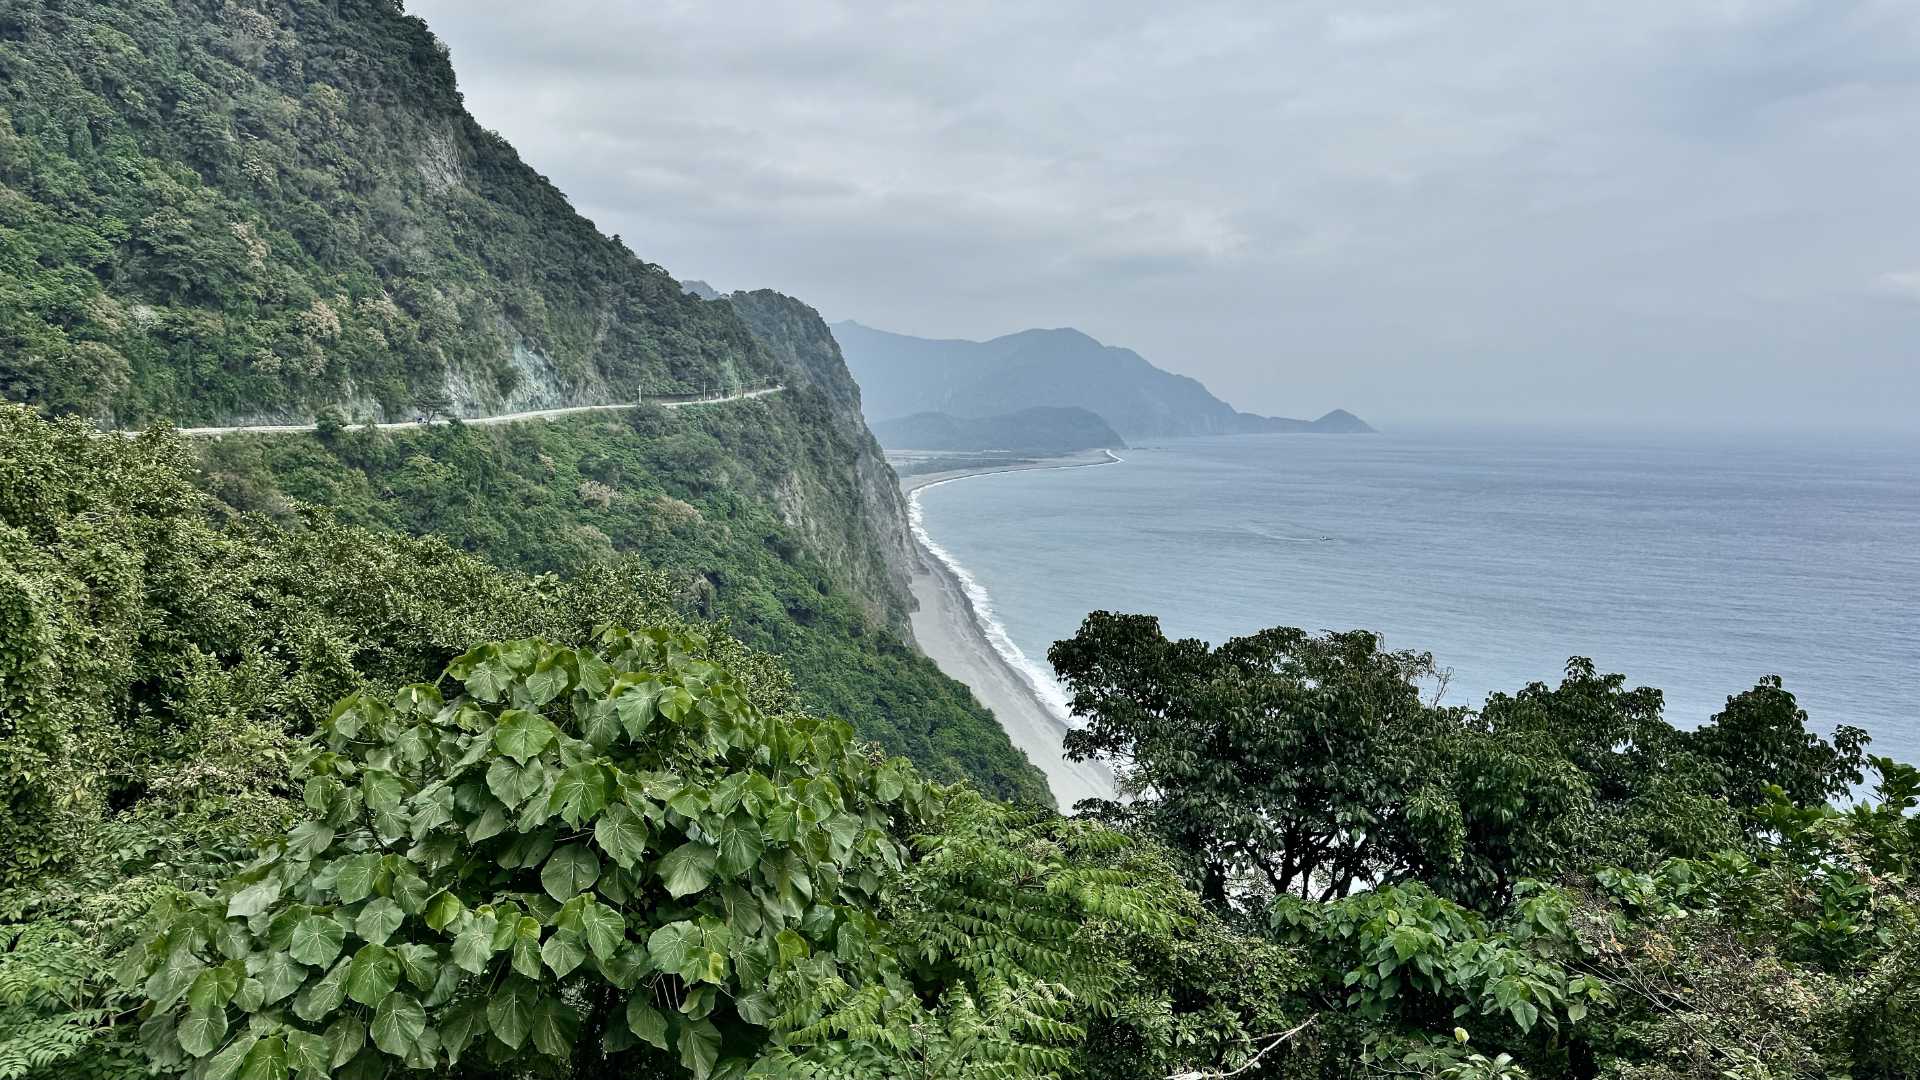 A wide-angle shot of a stunning piece of coastline, with jungle-clad mountains rising from the sea. A narrow road hugs the side of an extremely-steep cliff in the distance.